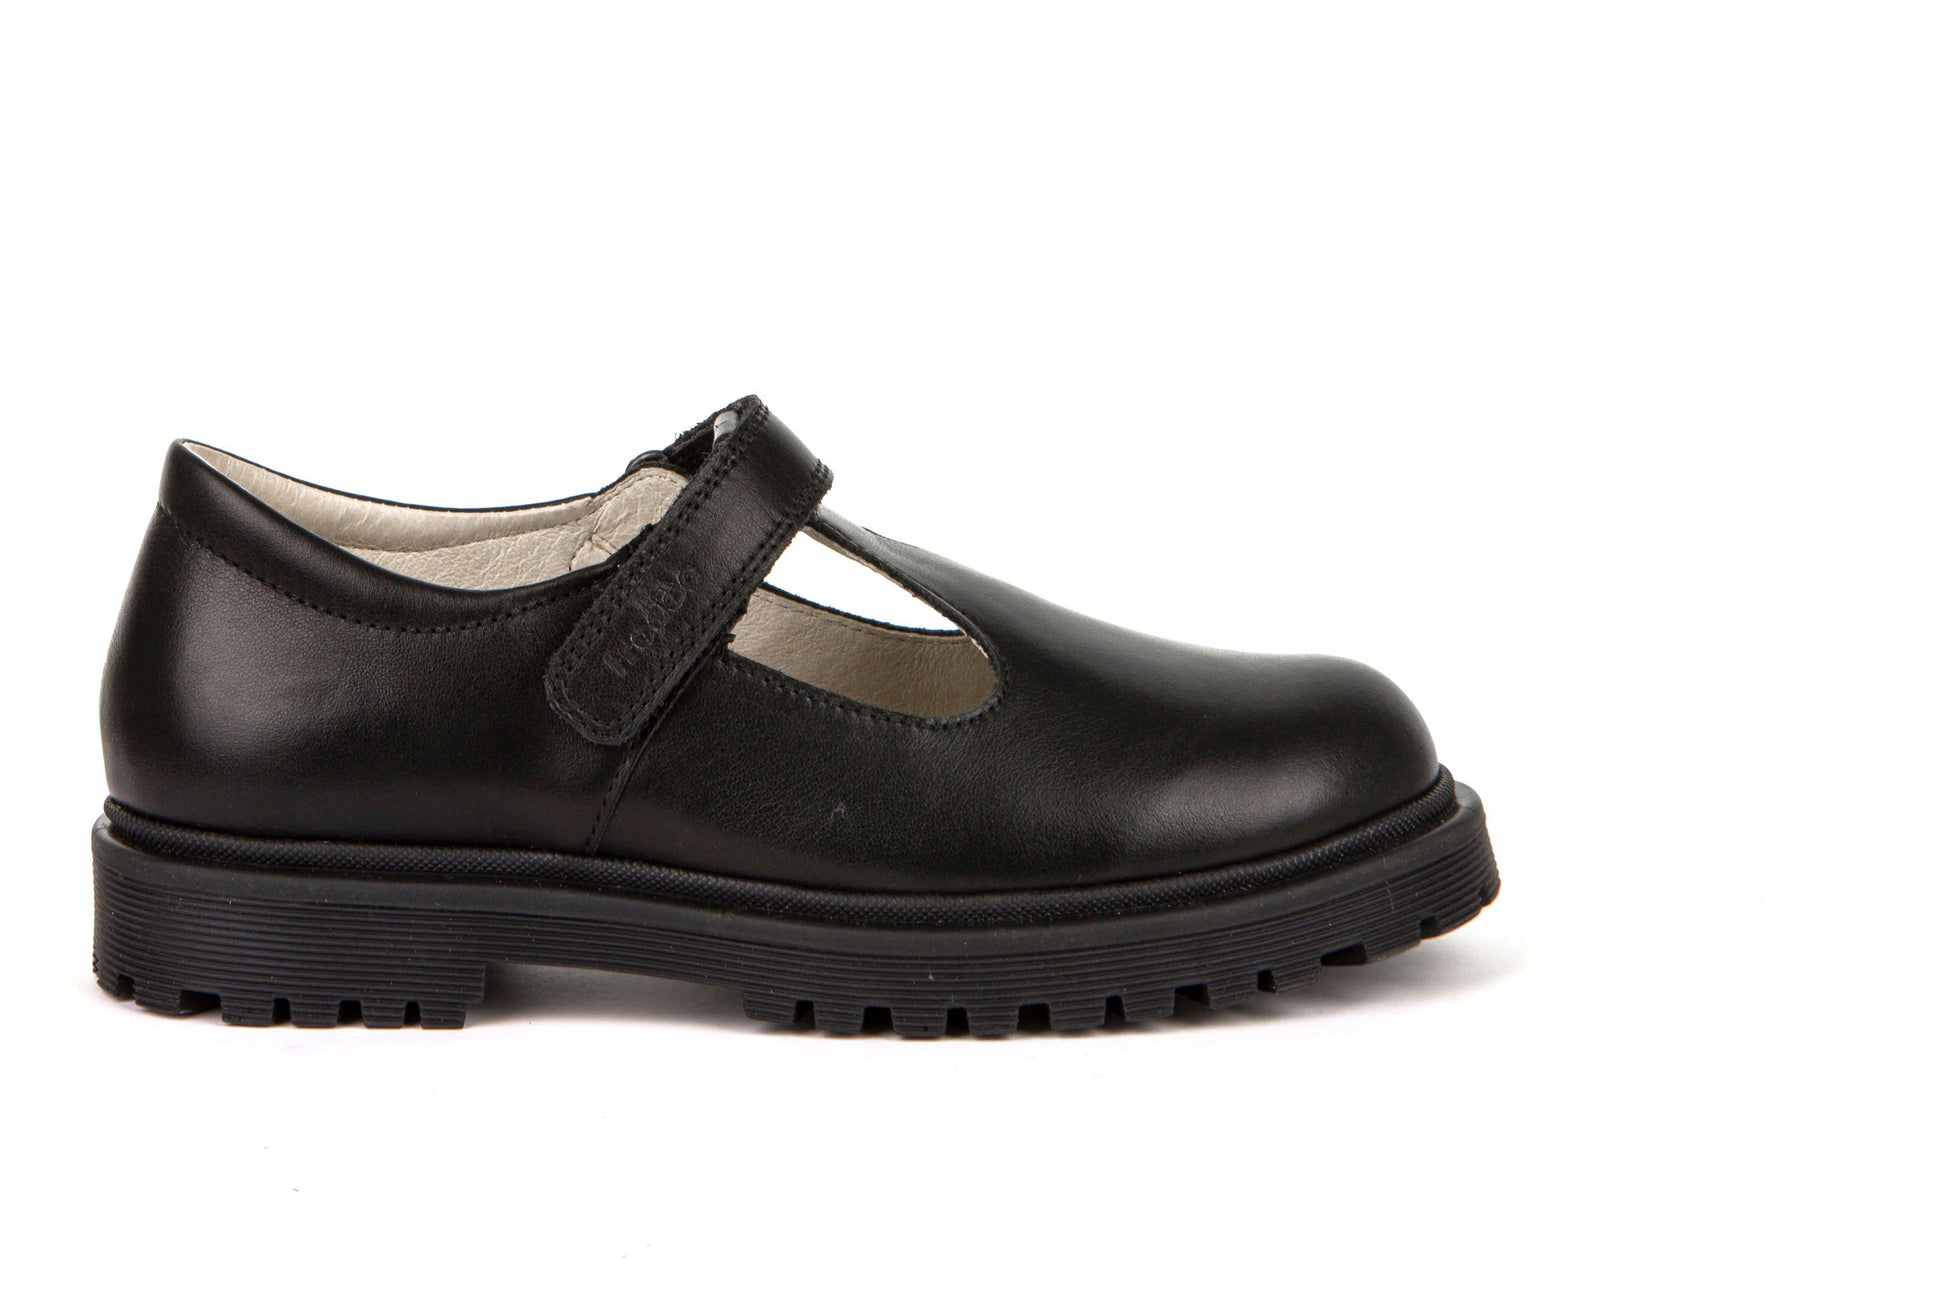 A girls T Bar school shoe by Froddo, style Lea T, in black leather with velcro fastening. Right side view.